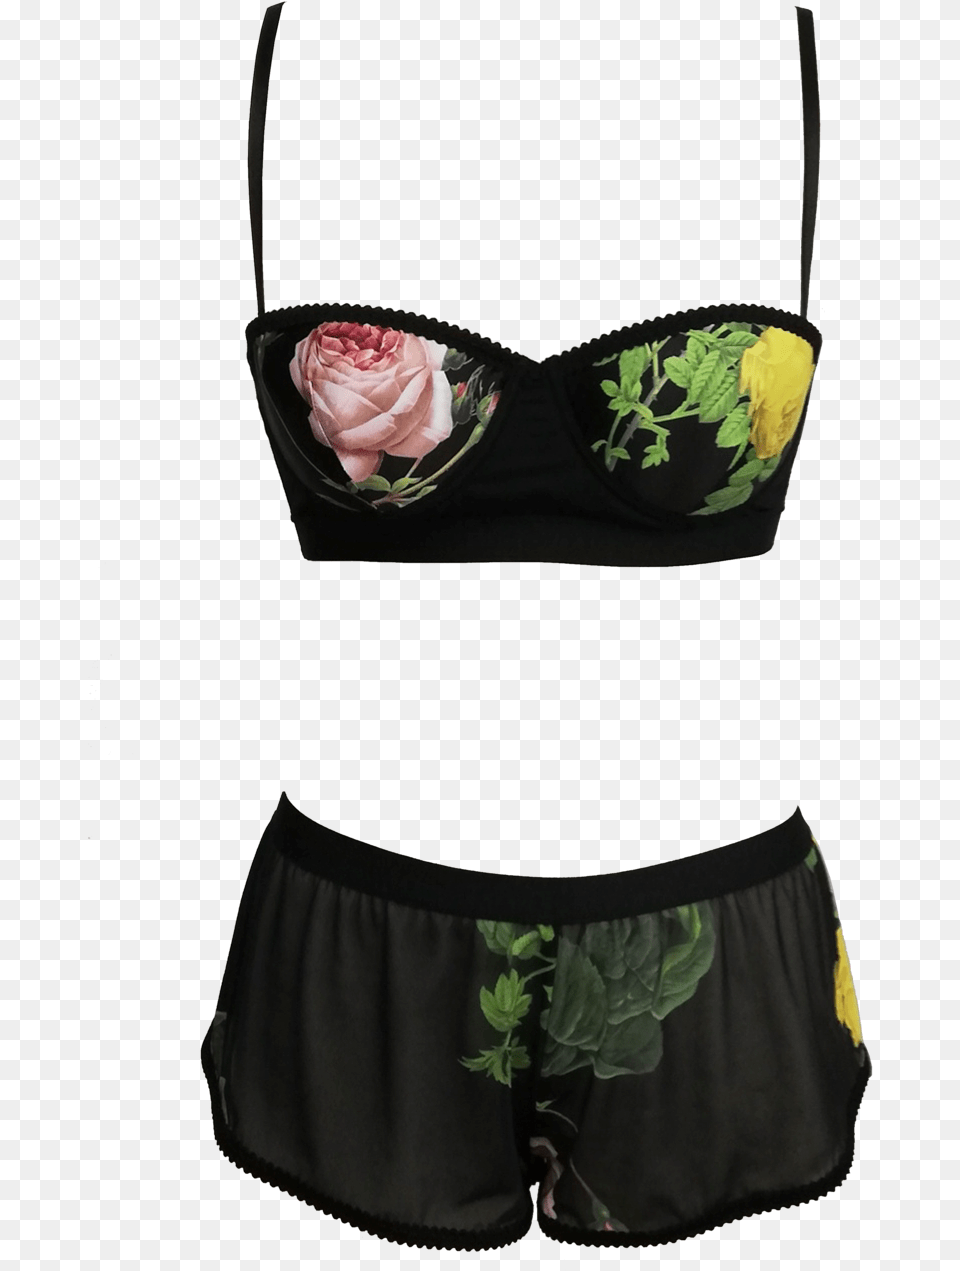 Lingerie Top, Rose, Plant, Flower, Accessories Png Image